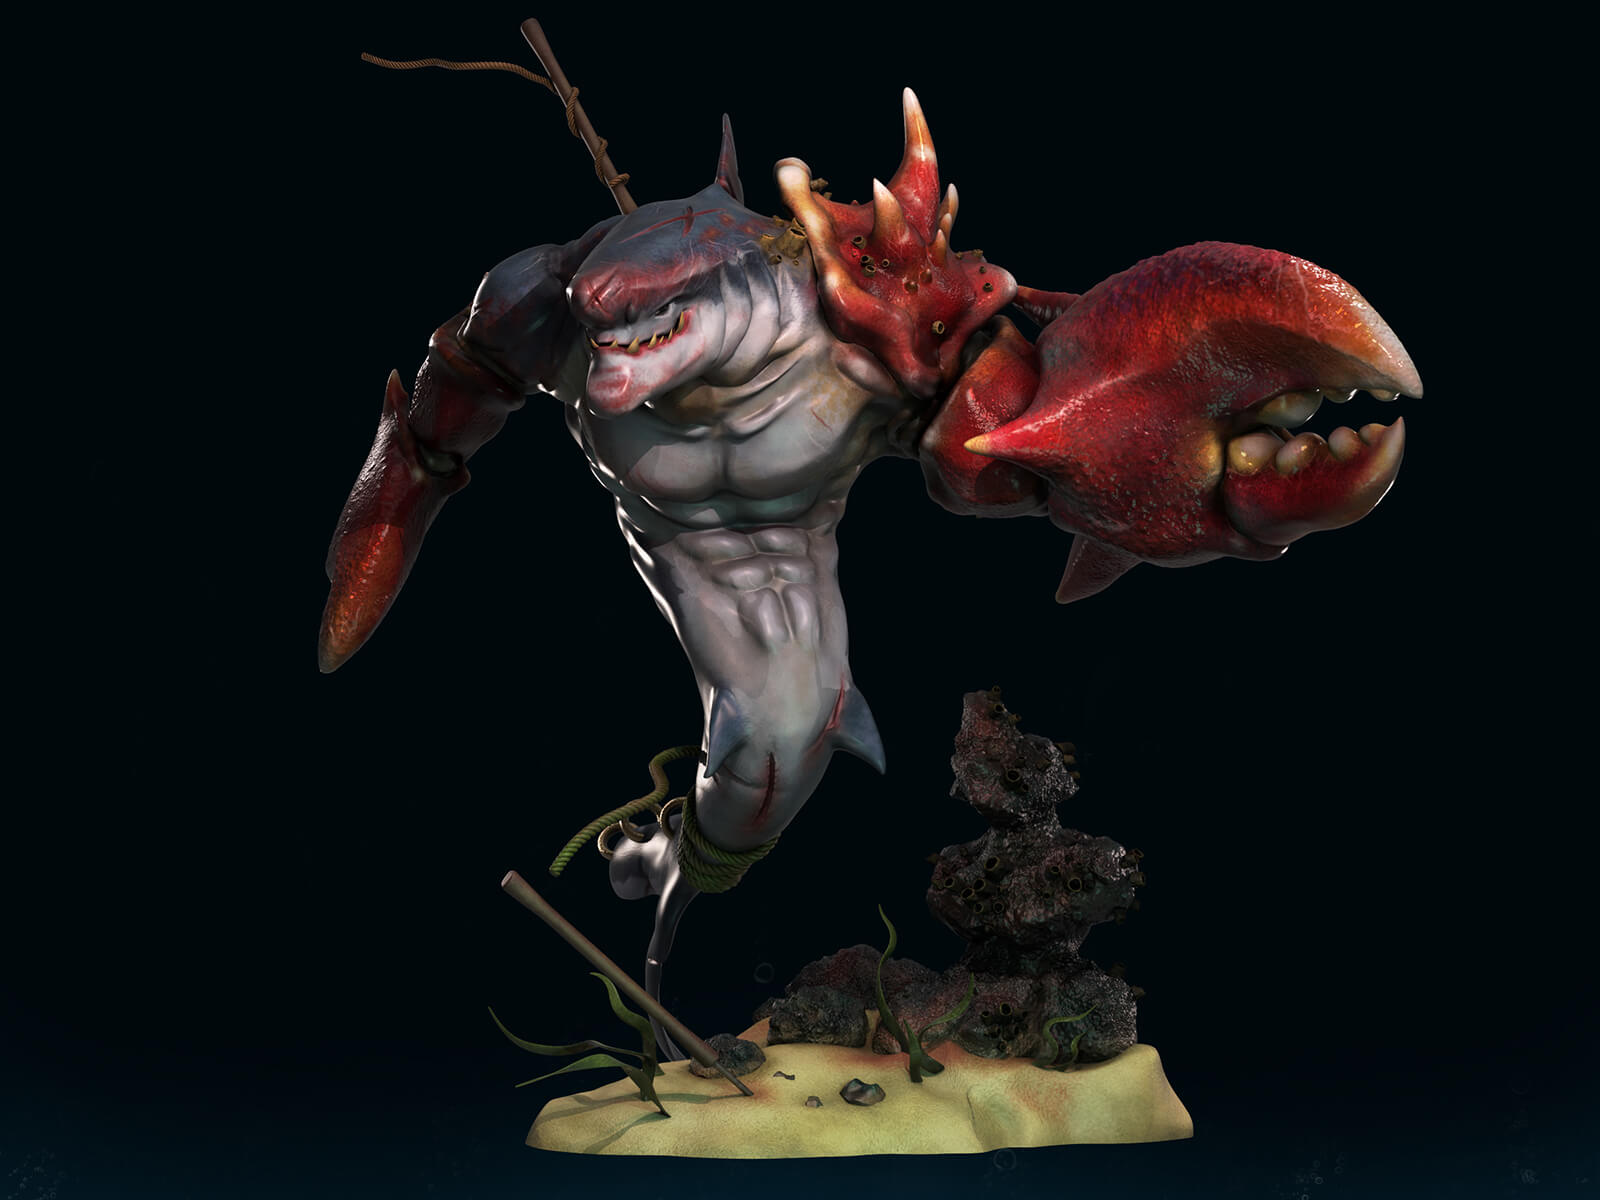 A creature with a dolphin's head and lobster claws